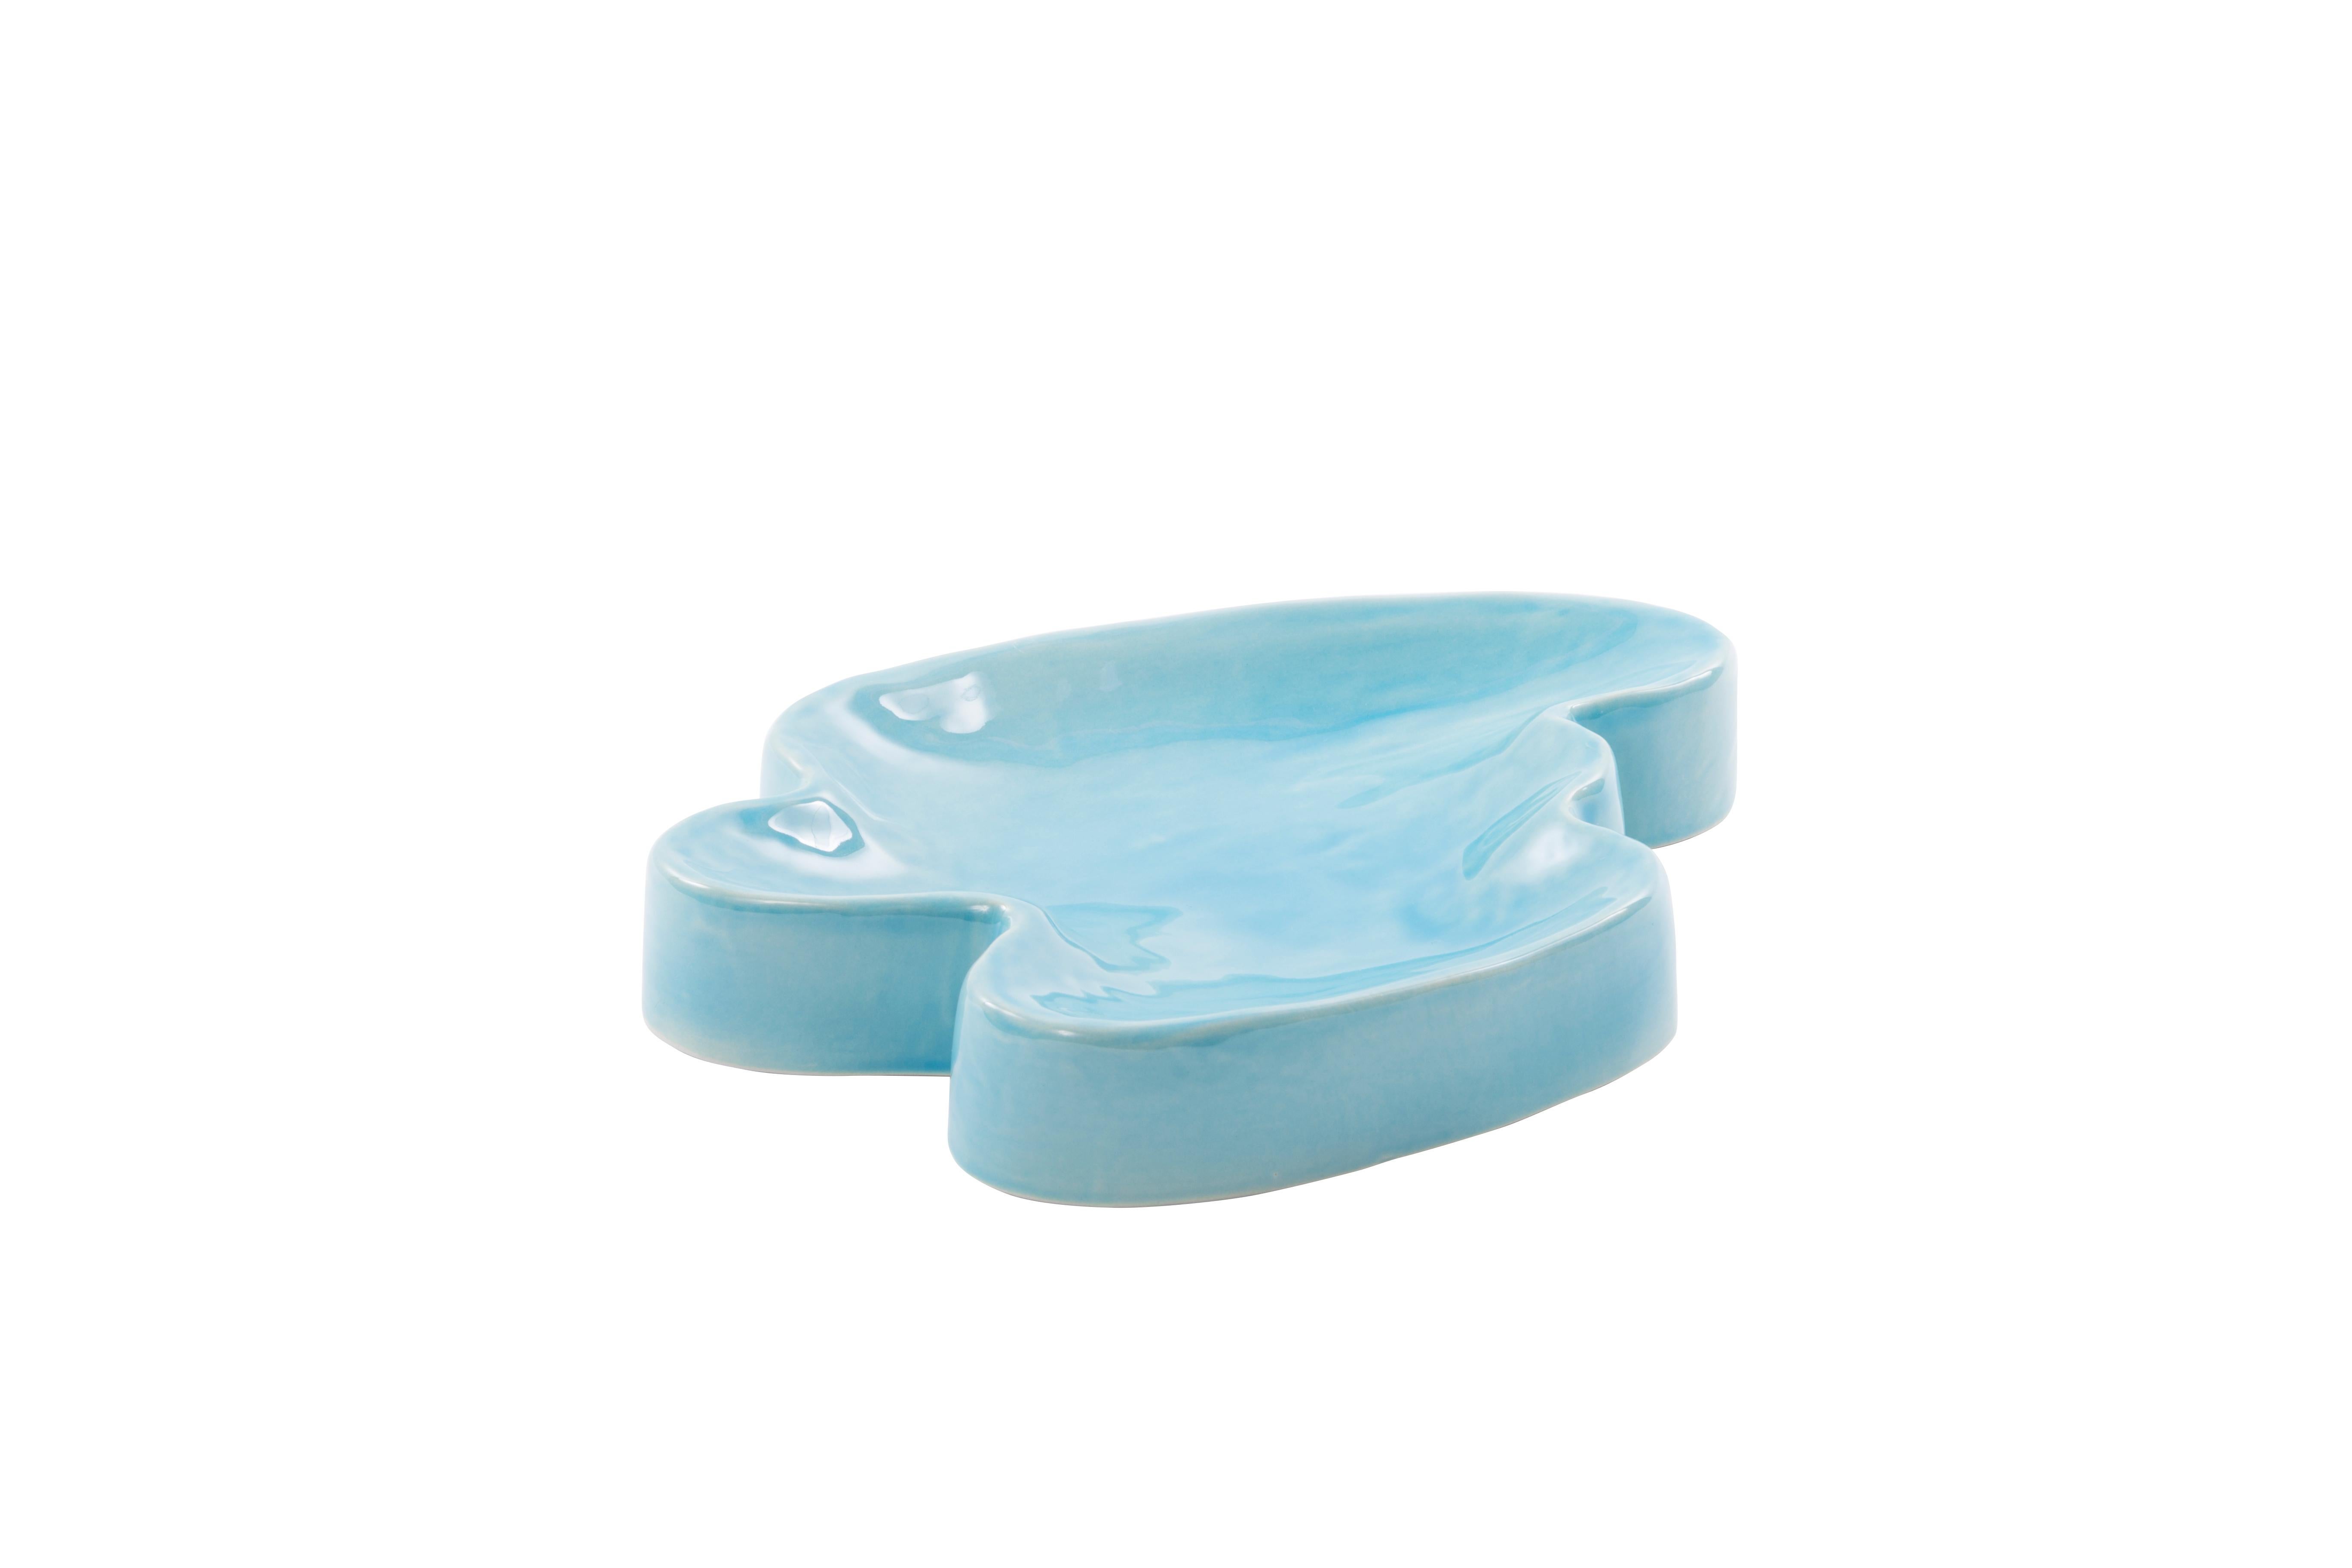 Lake small tropical Turquoise tray by Pulpo
Dimensions: D 27 x W 20 x H 4 cm
Materials: ceramic

Also available in different colours.

These charming additions allow you to create a true tablescape environment; from the tones and textures of